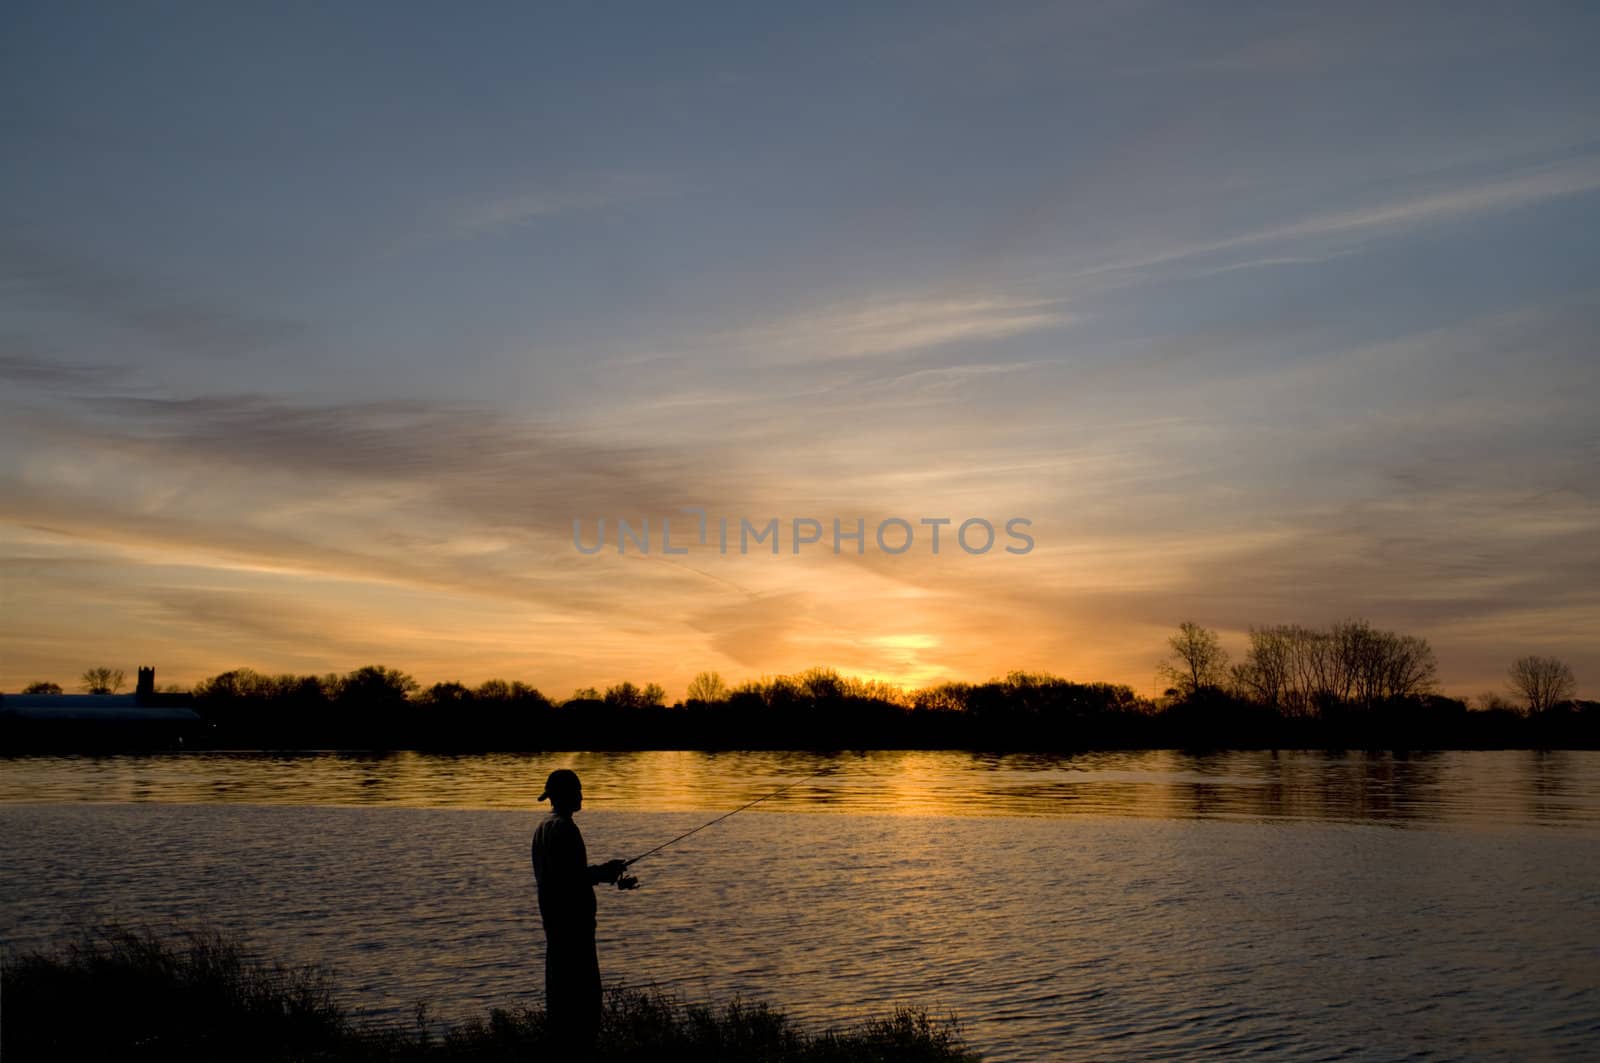 Man fishing from the river's edge at sunrise